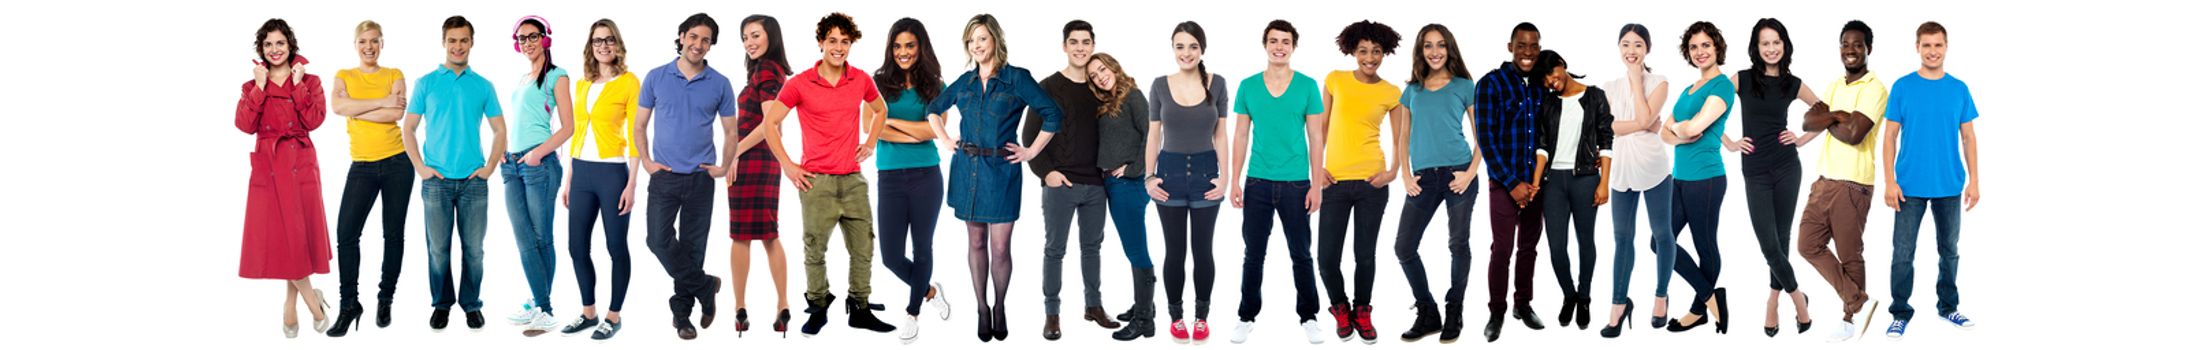 Collection of full length portrait of people in a collage